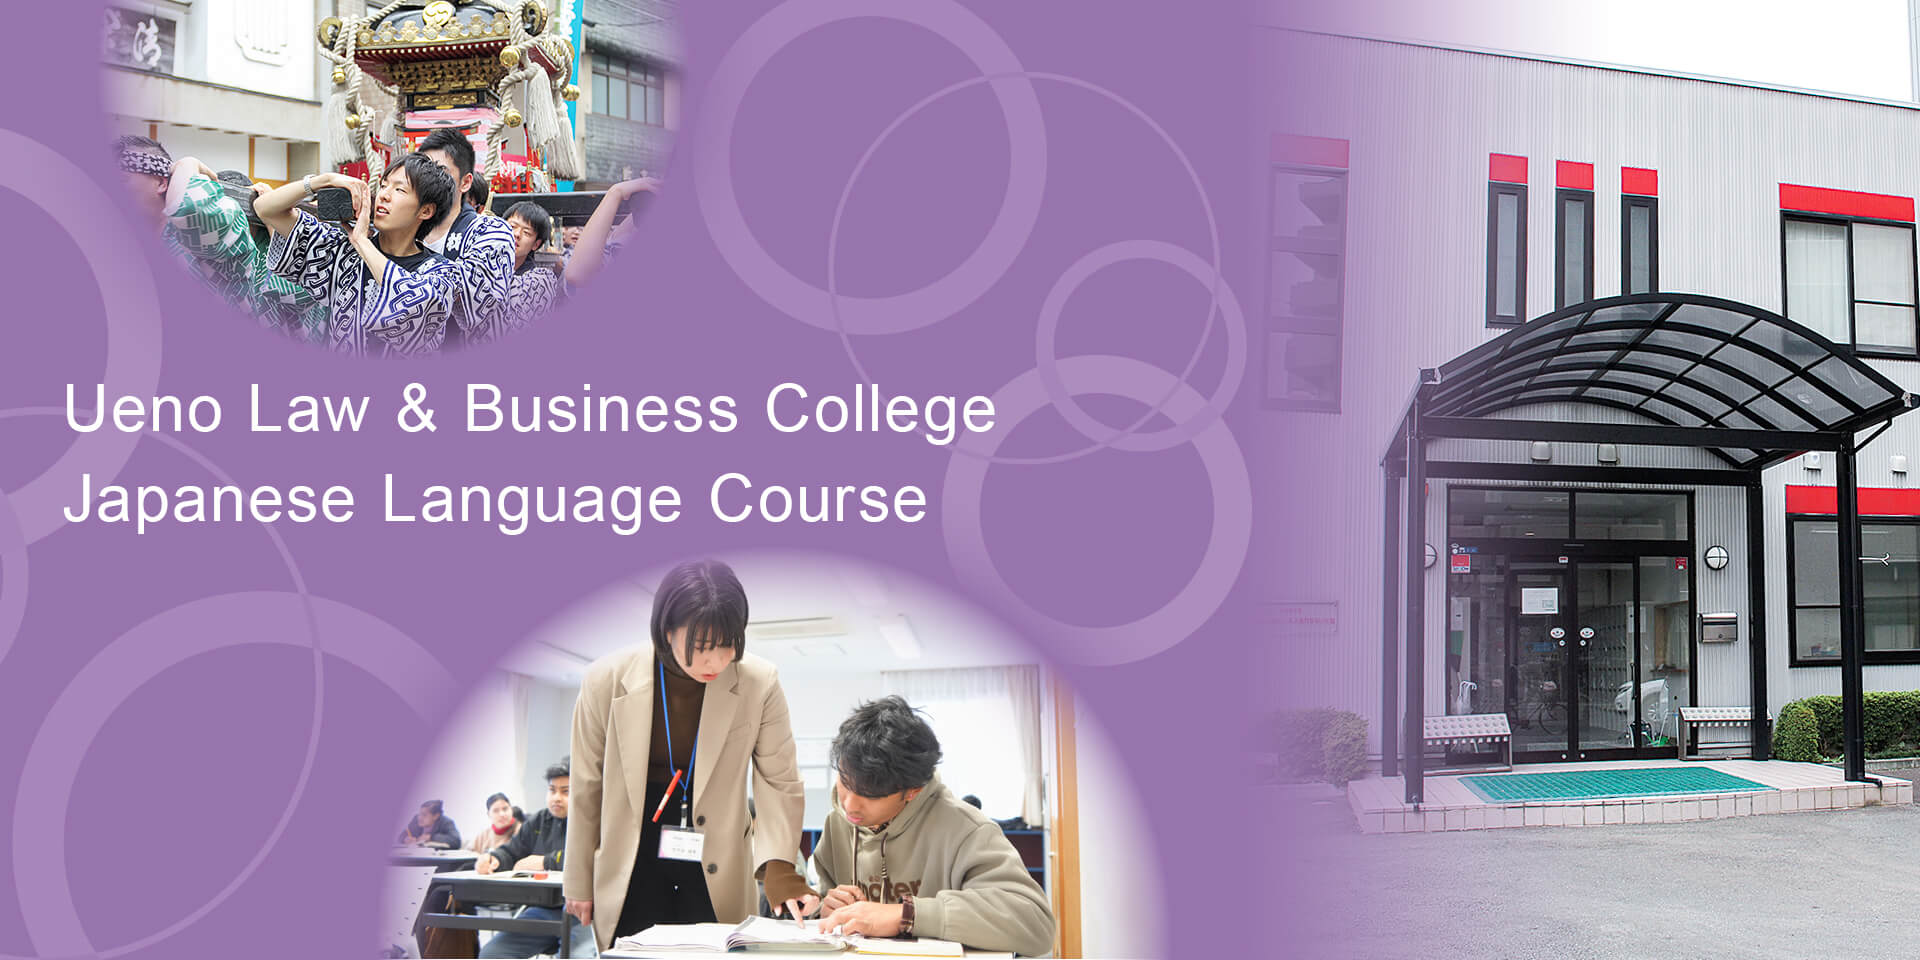 Ueno Law & Business College Japanese Language Course